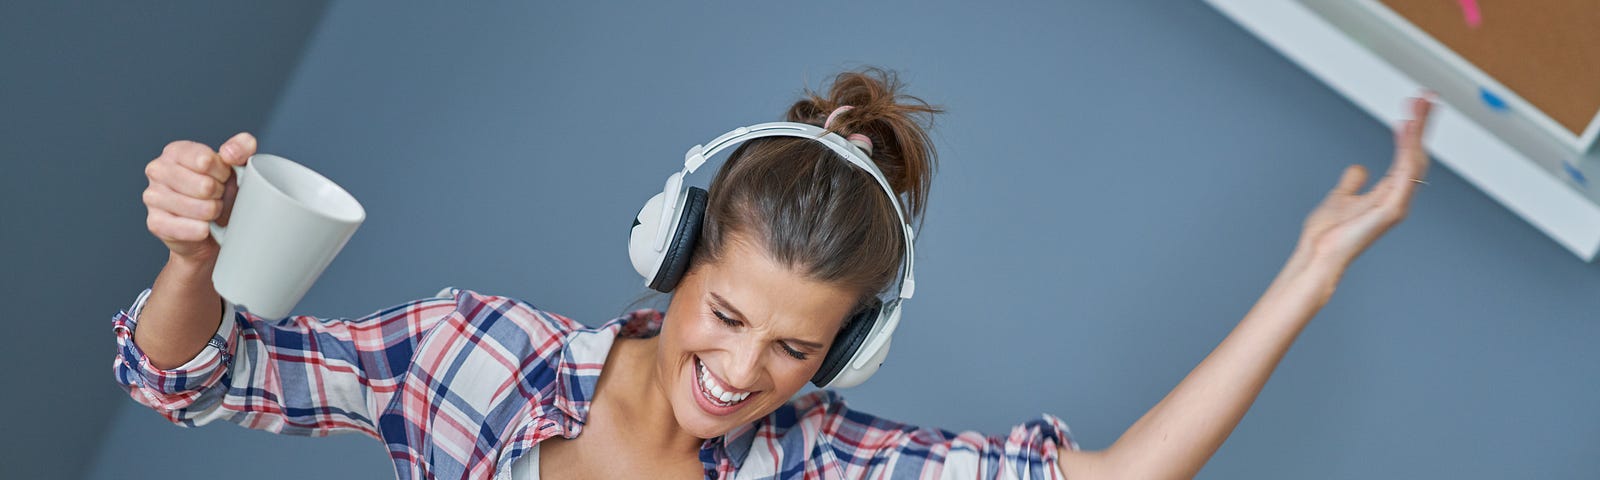 woman at work listening to music in a great mood because of it